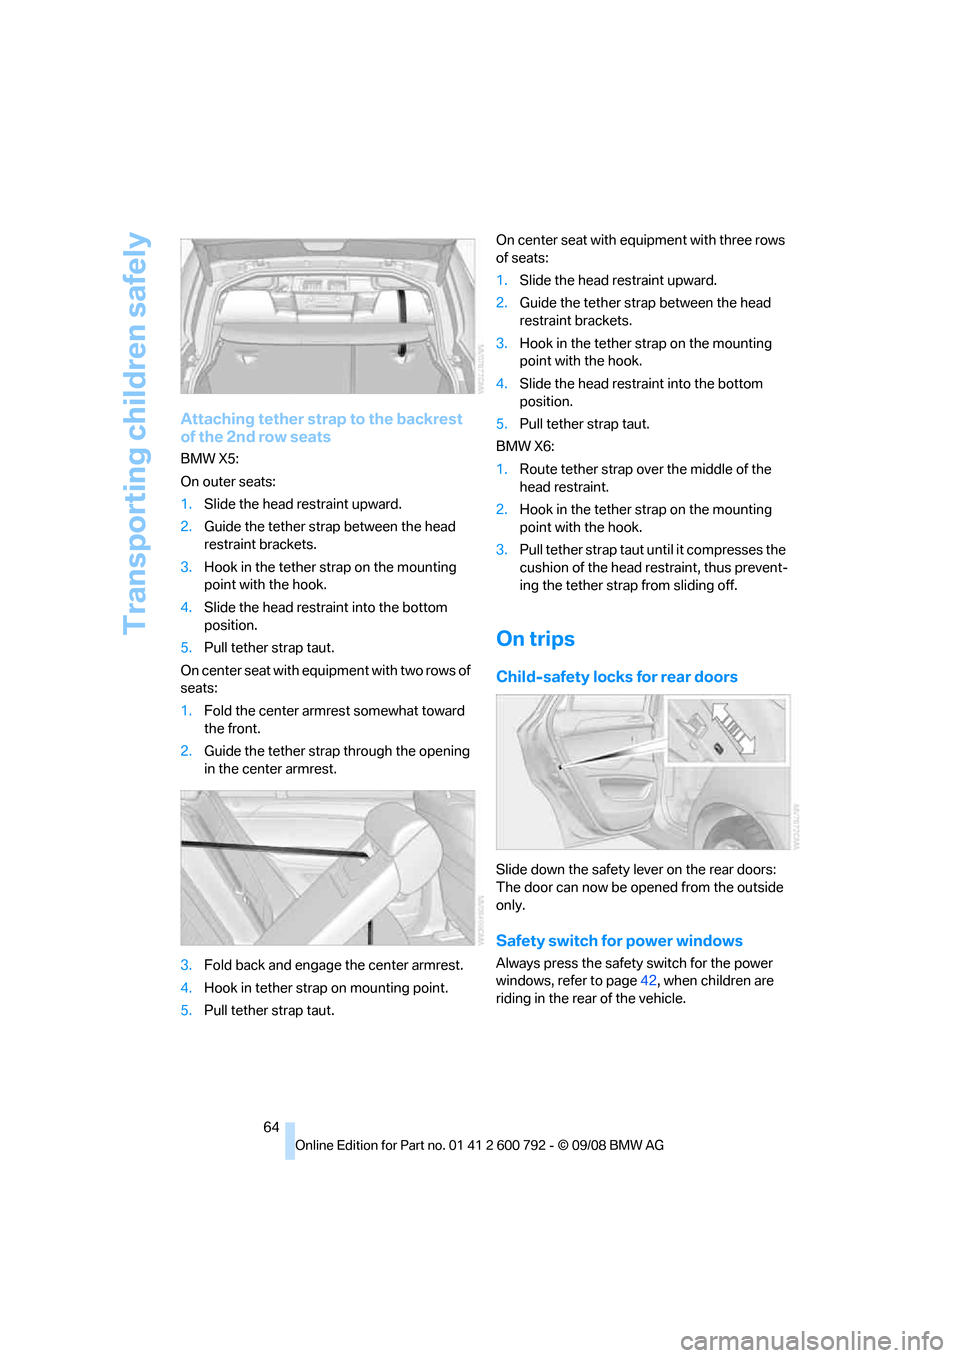 BMW X6M 2009 E71 Repair Manual Transporting children safely
64
Attaching tether strap to the backrest 
of the 2nd row seats
BMW X5:
On outer seats:
1.Slide the head re straint upward.
2. Guide the tether stra p between the head 
re